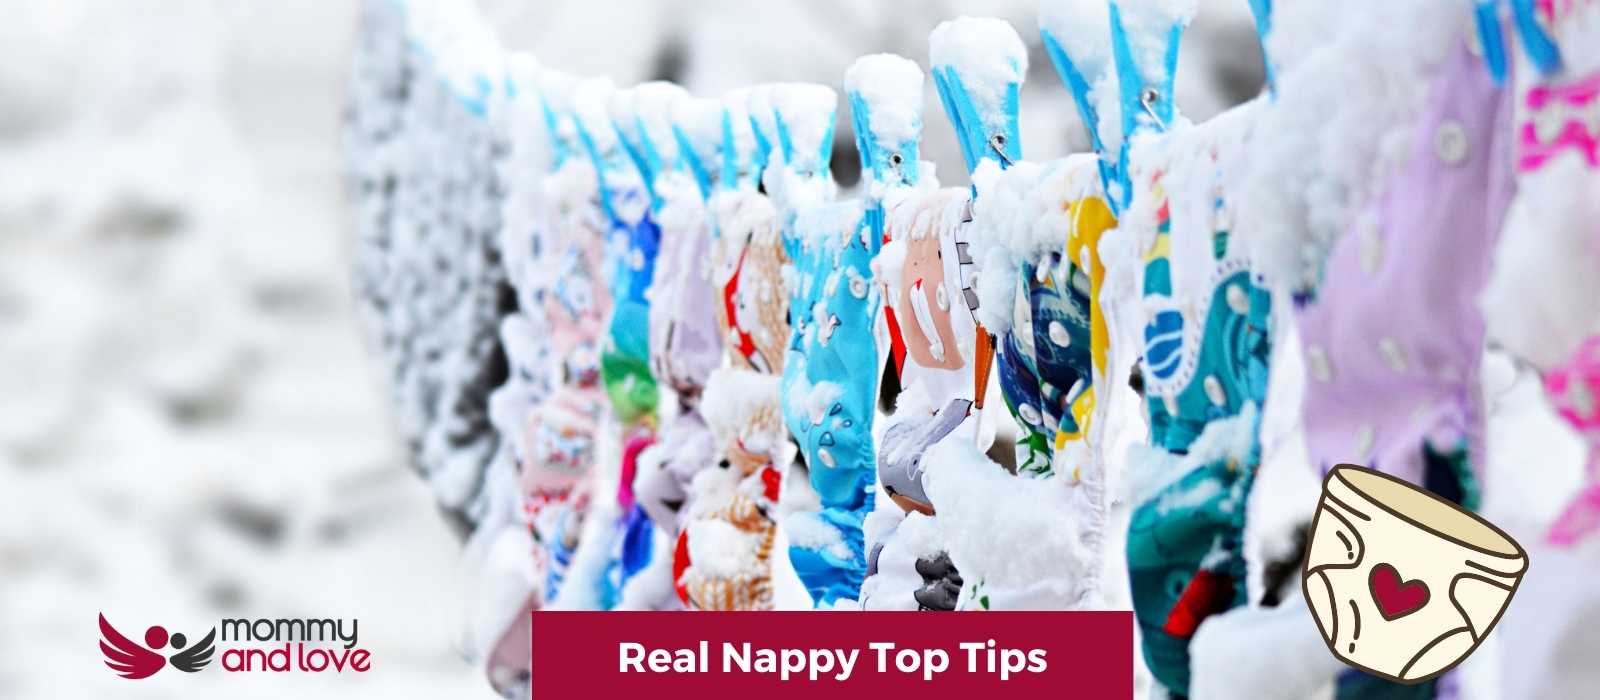 Real Nappy Top Tips